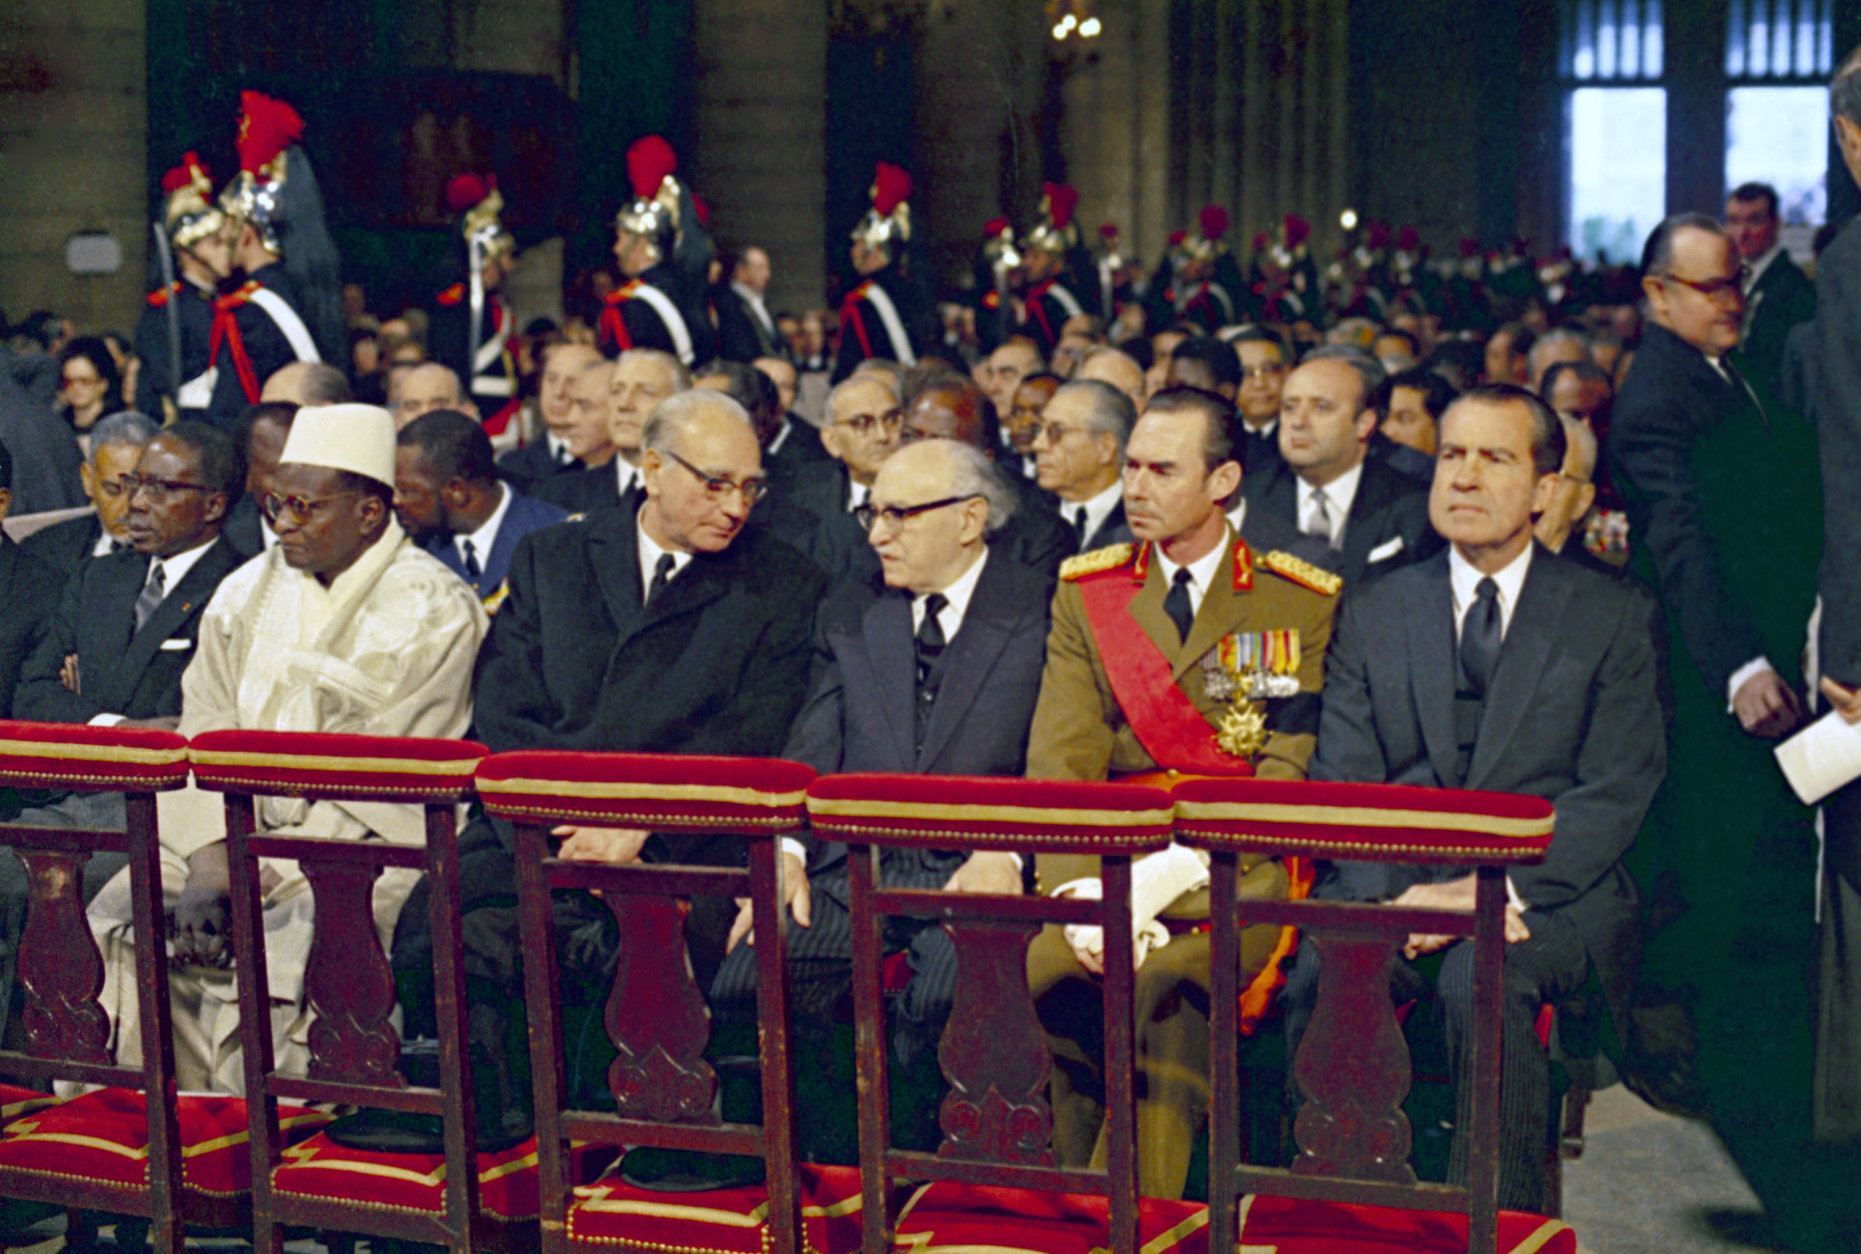 The funeral of former French President Charles De Gaulle at Notre-Dame Cathedral, Paris, France, on Nov. 12, 1970, was attended by many heads of state and members of European Royal families. President of the United States, Richard Nixon, sits right before the start of the service. (AP Photo)